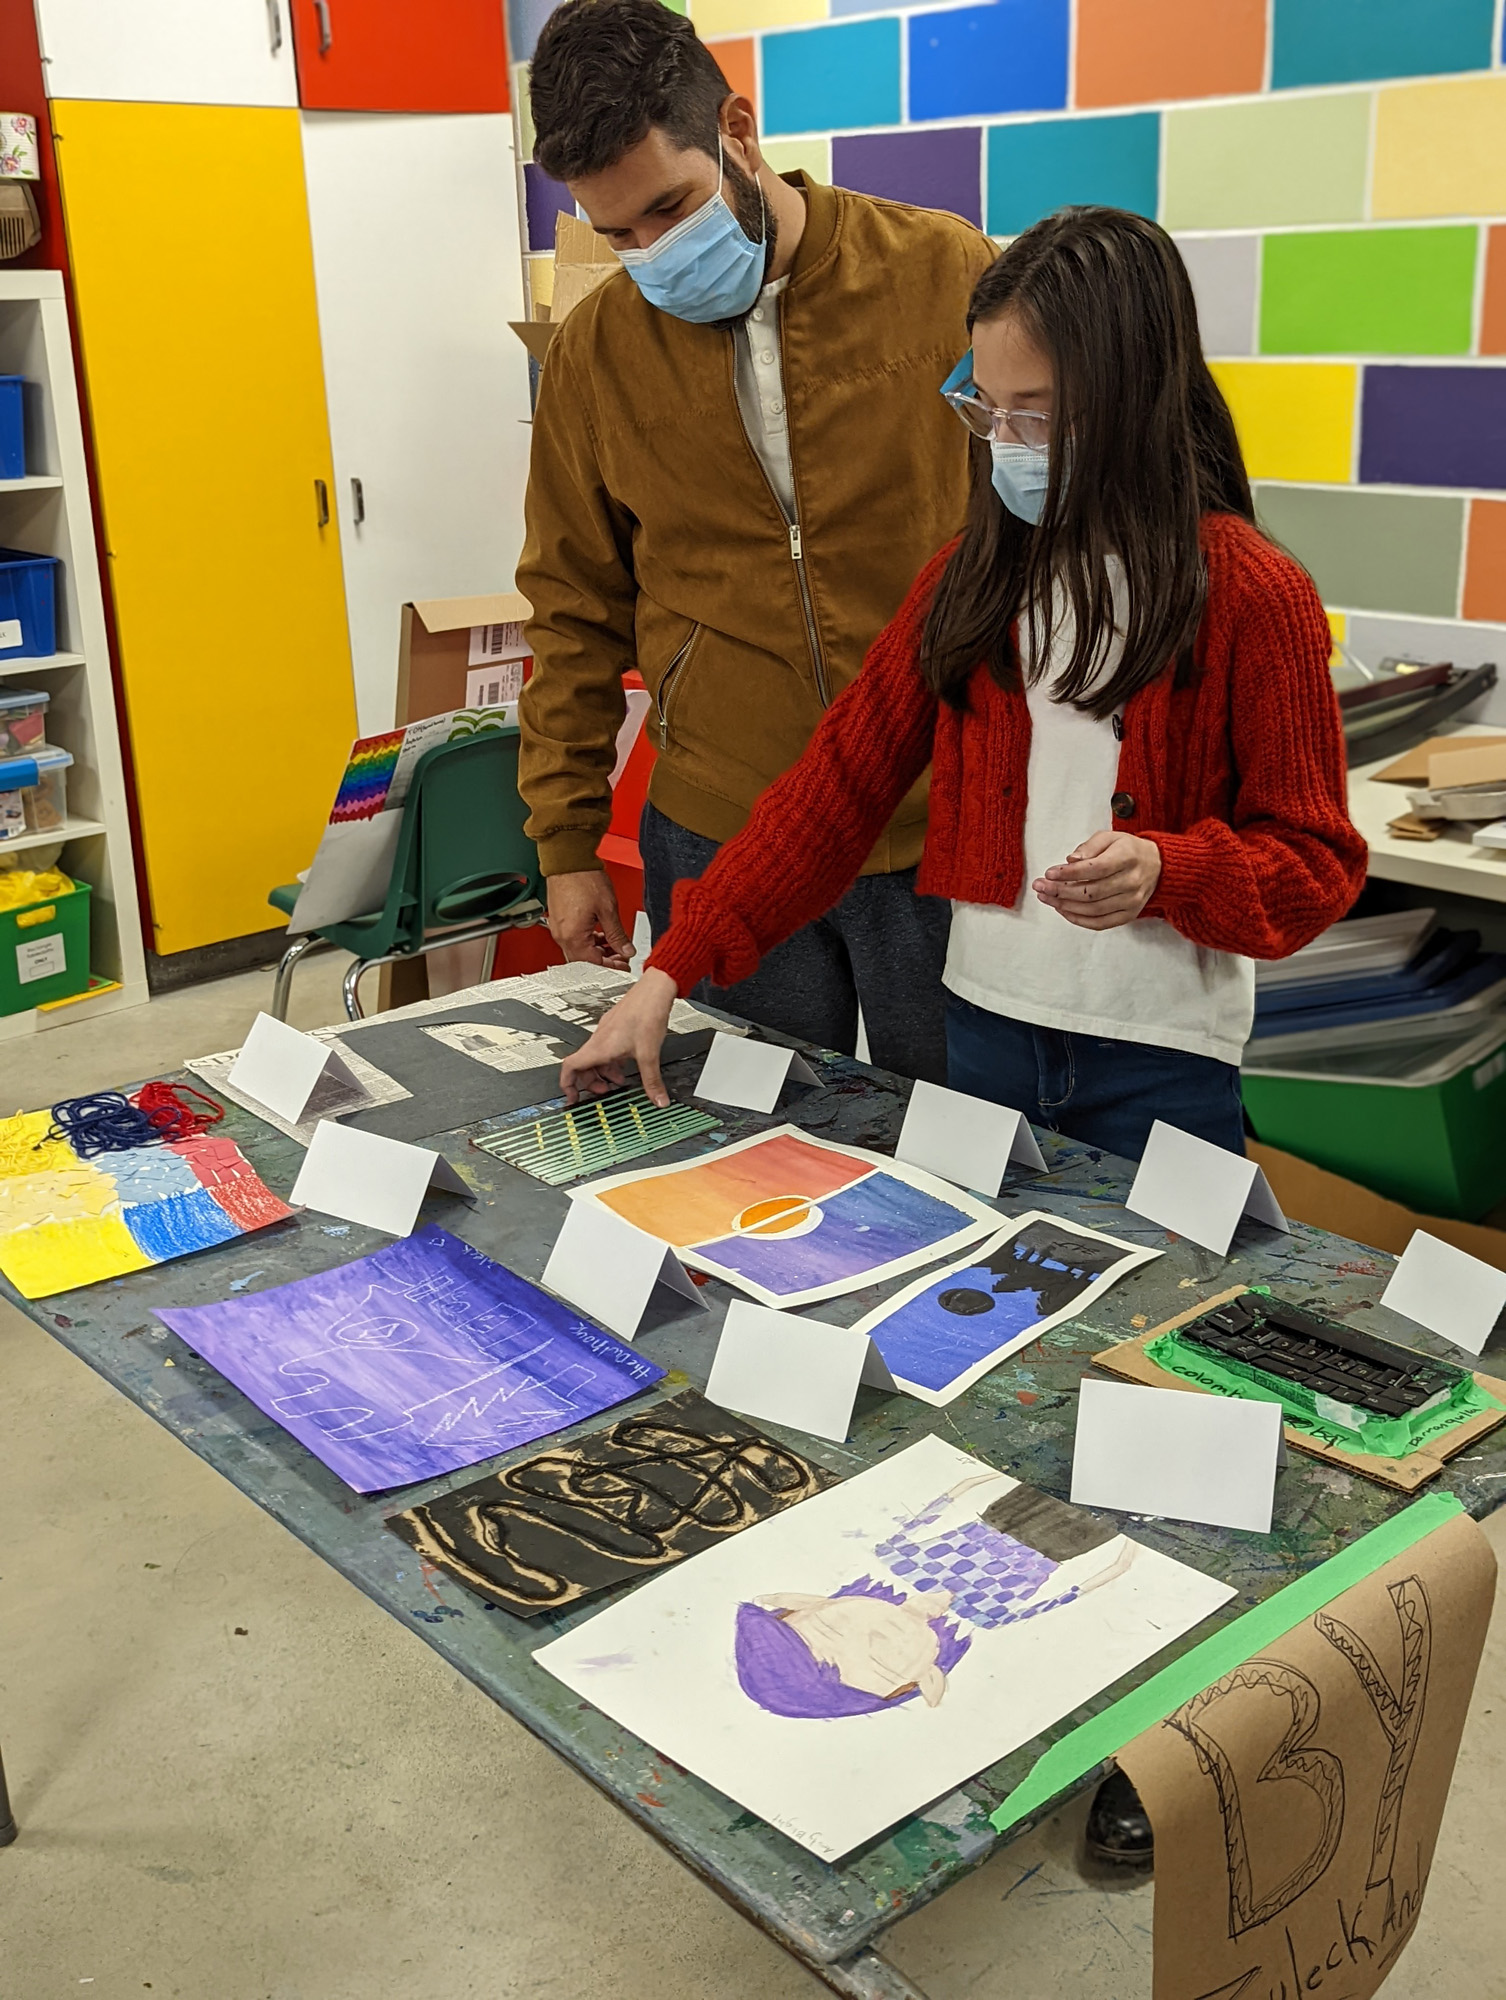 A young girl uses a brush to touch up a print in progress of repeating black bird patterns with printmaking tools laid out around her work space